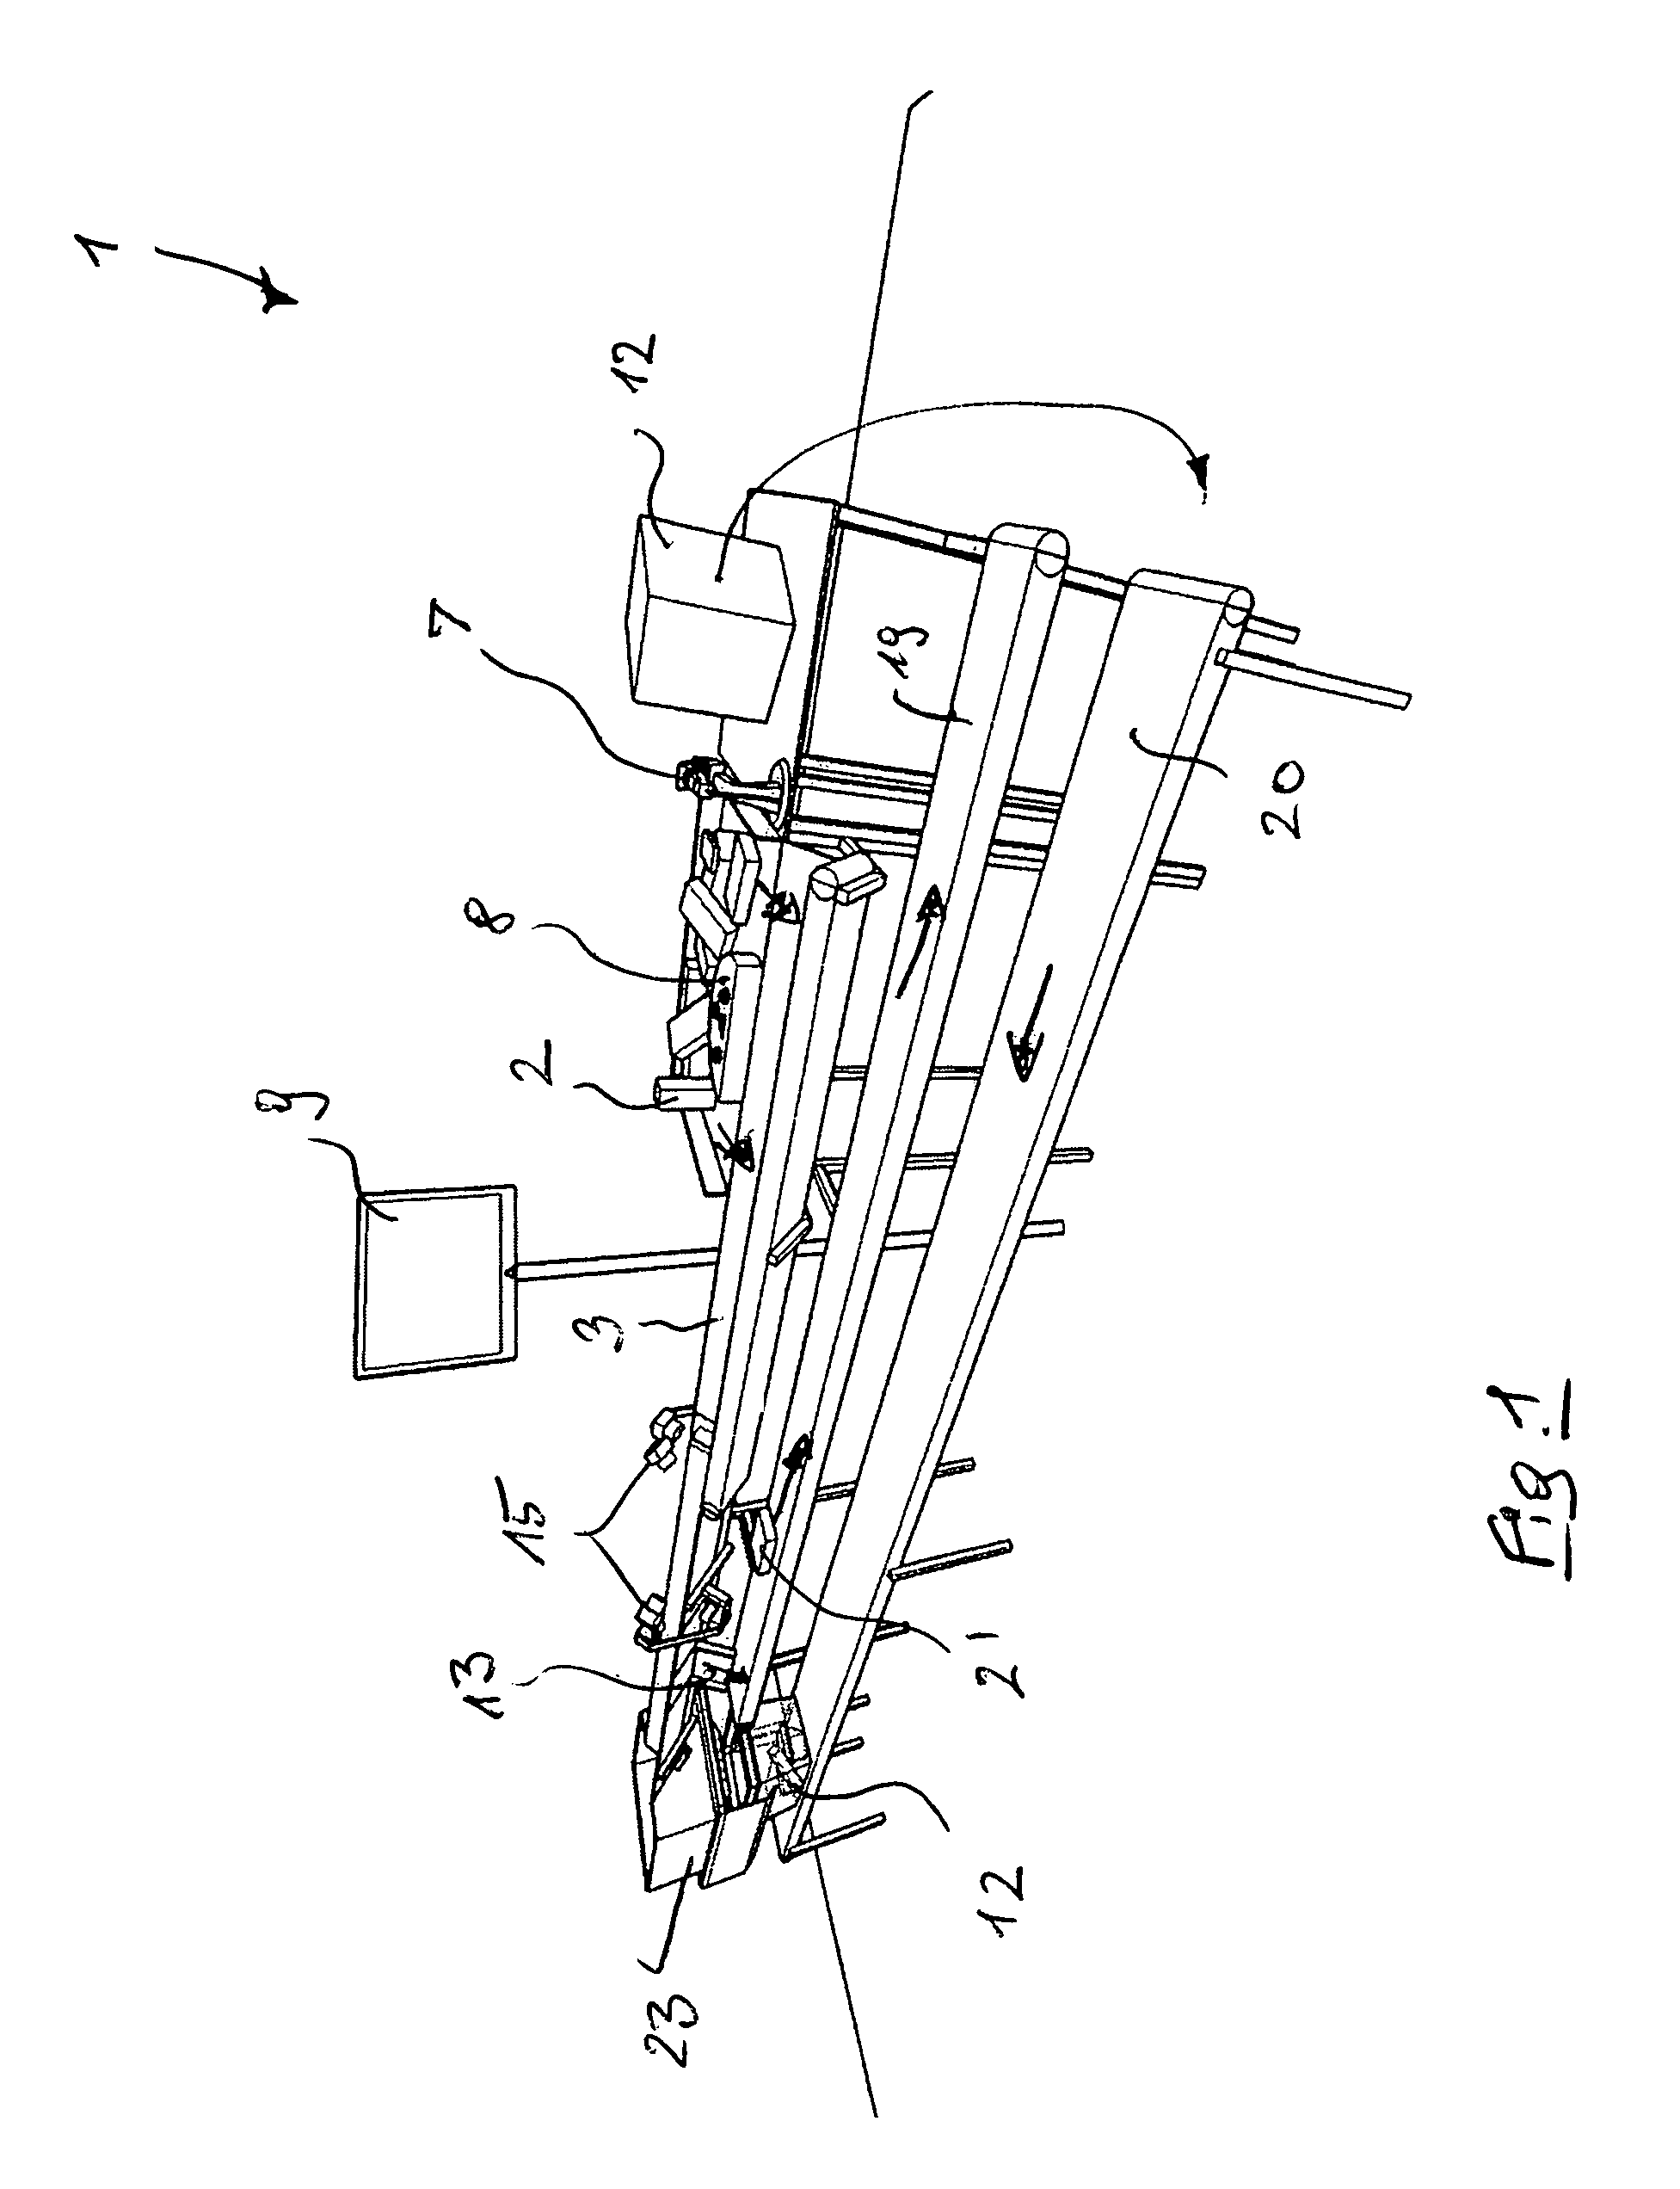 Device and process for recognizing and guiding individually packaged products with a code